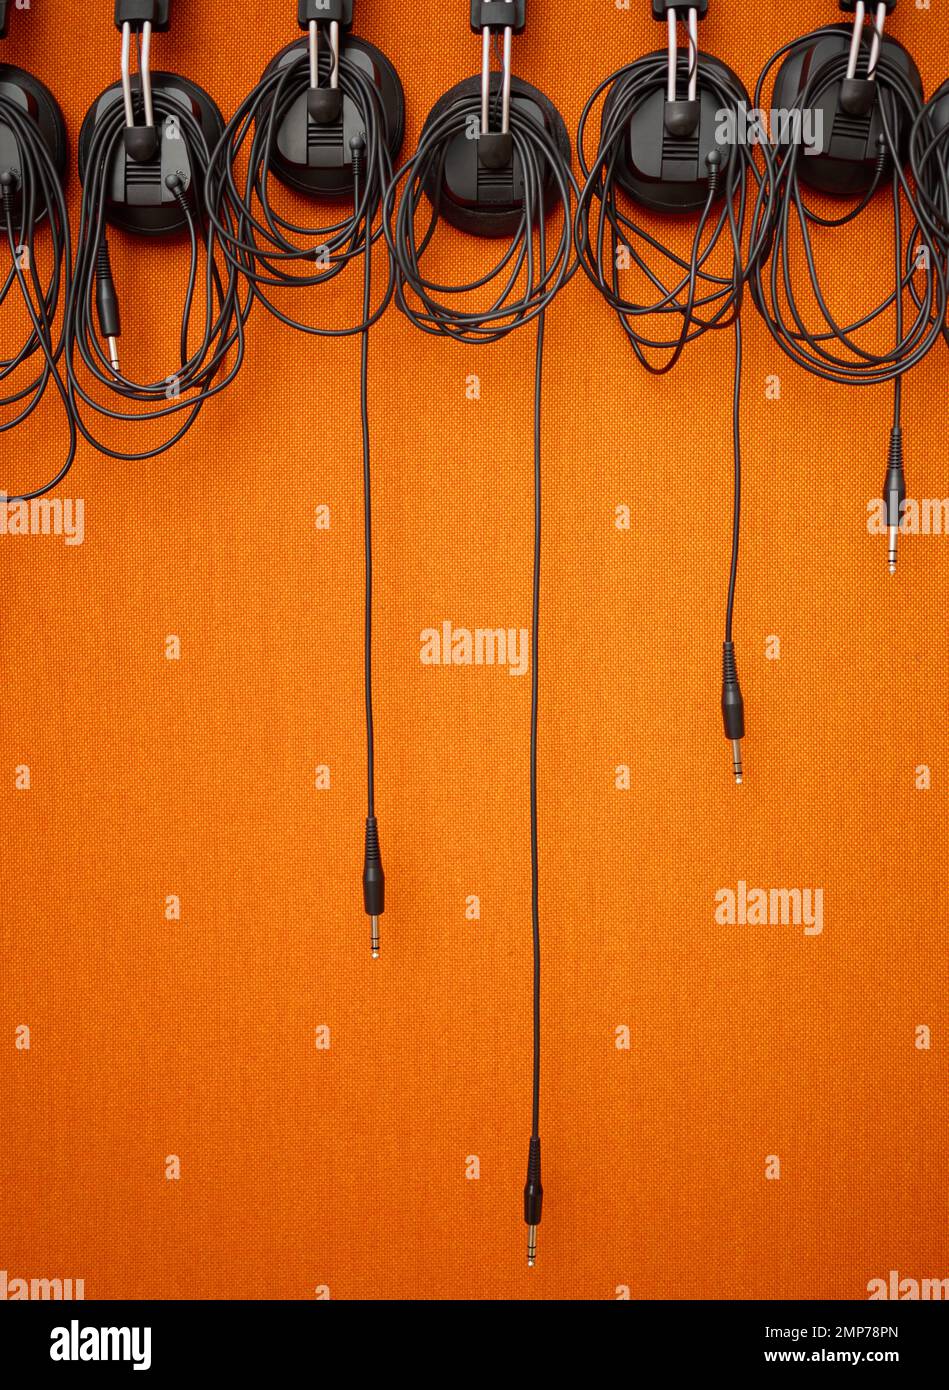 Audio, cables and mockup on an orange wall background in a music studio for recording or sound engineering. Media, equipment and hanging wires in an Stock Photo